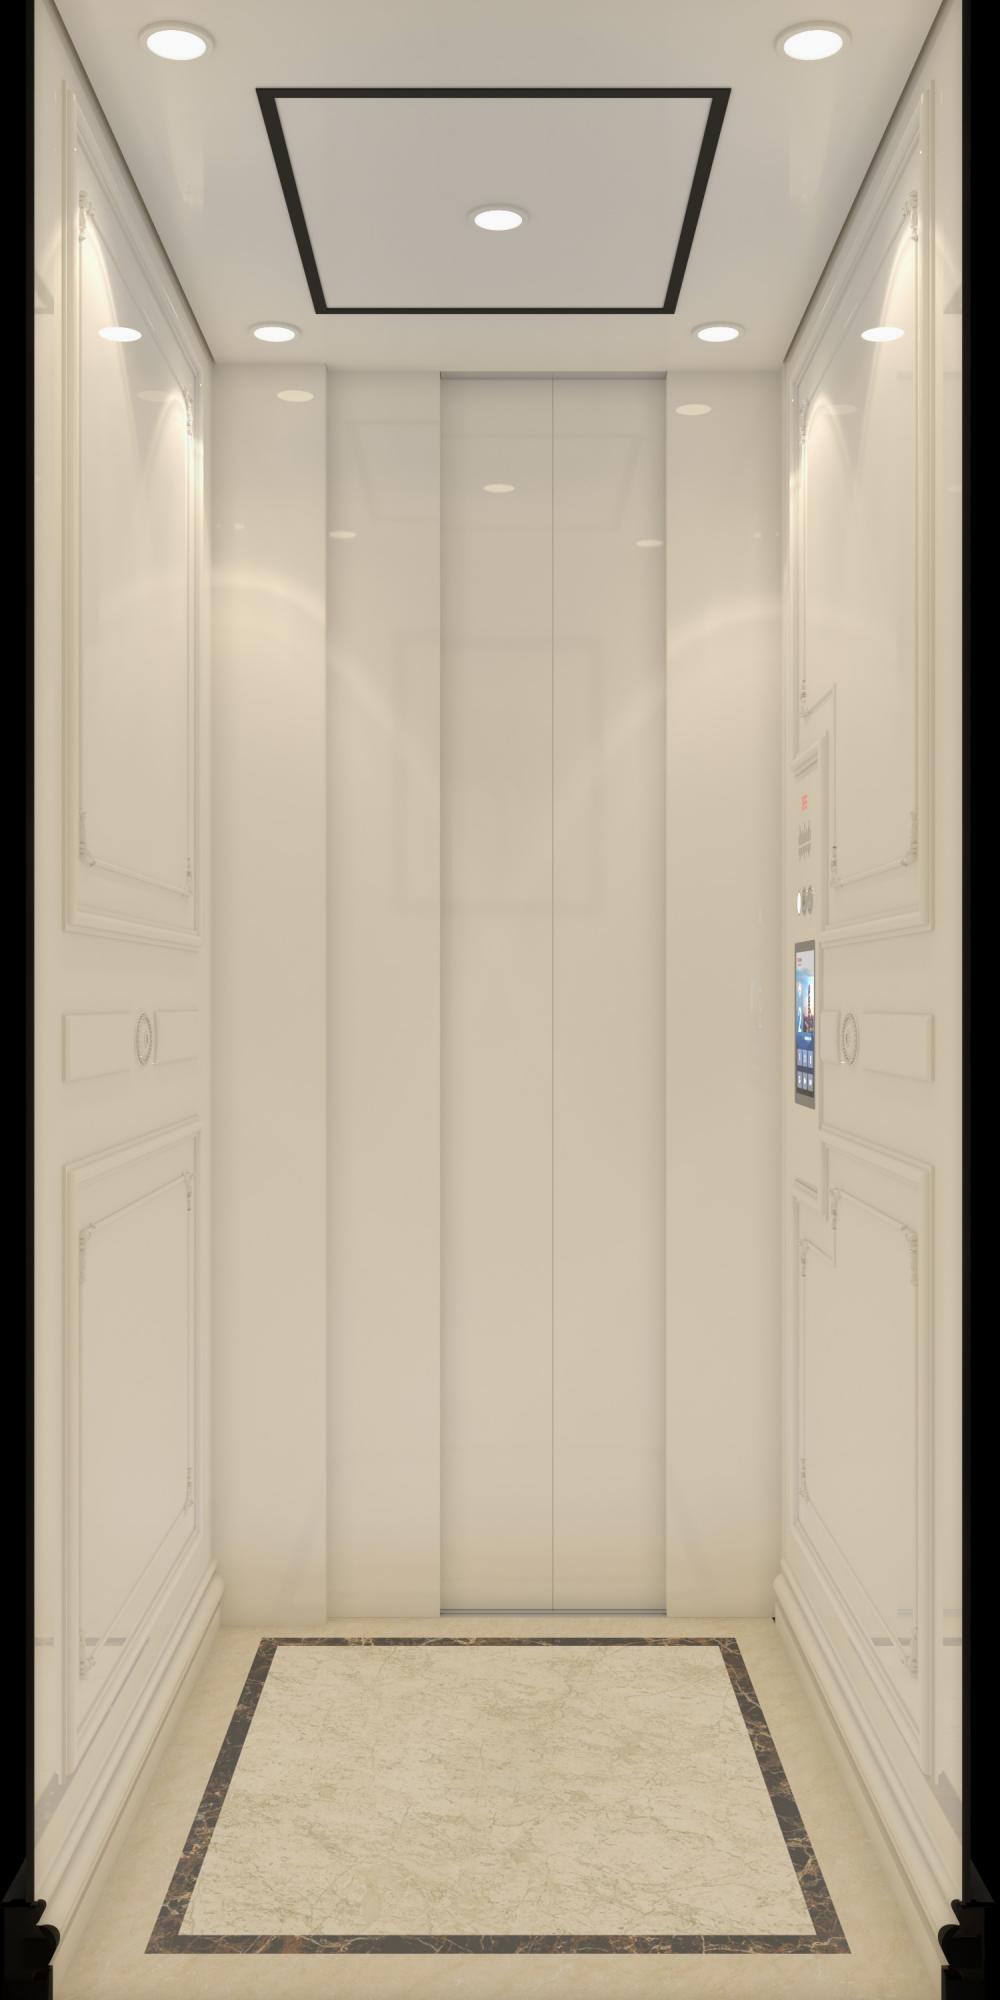 Passenger Elevator Commercial Lift for 4-16 People